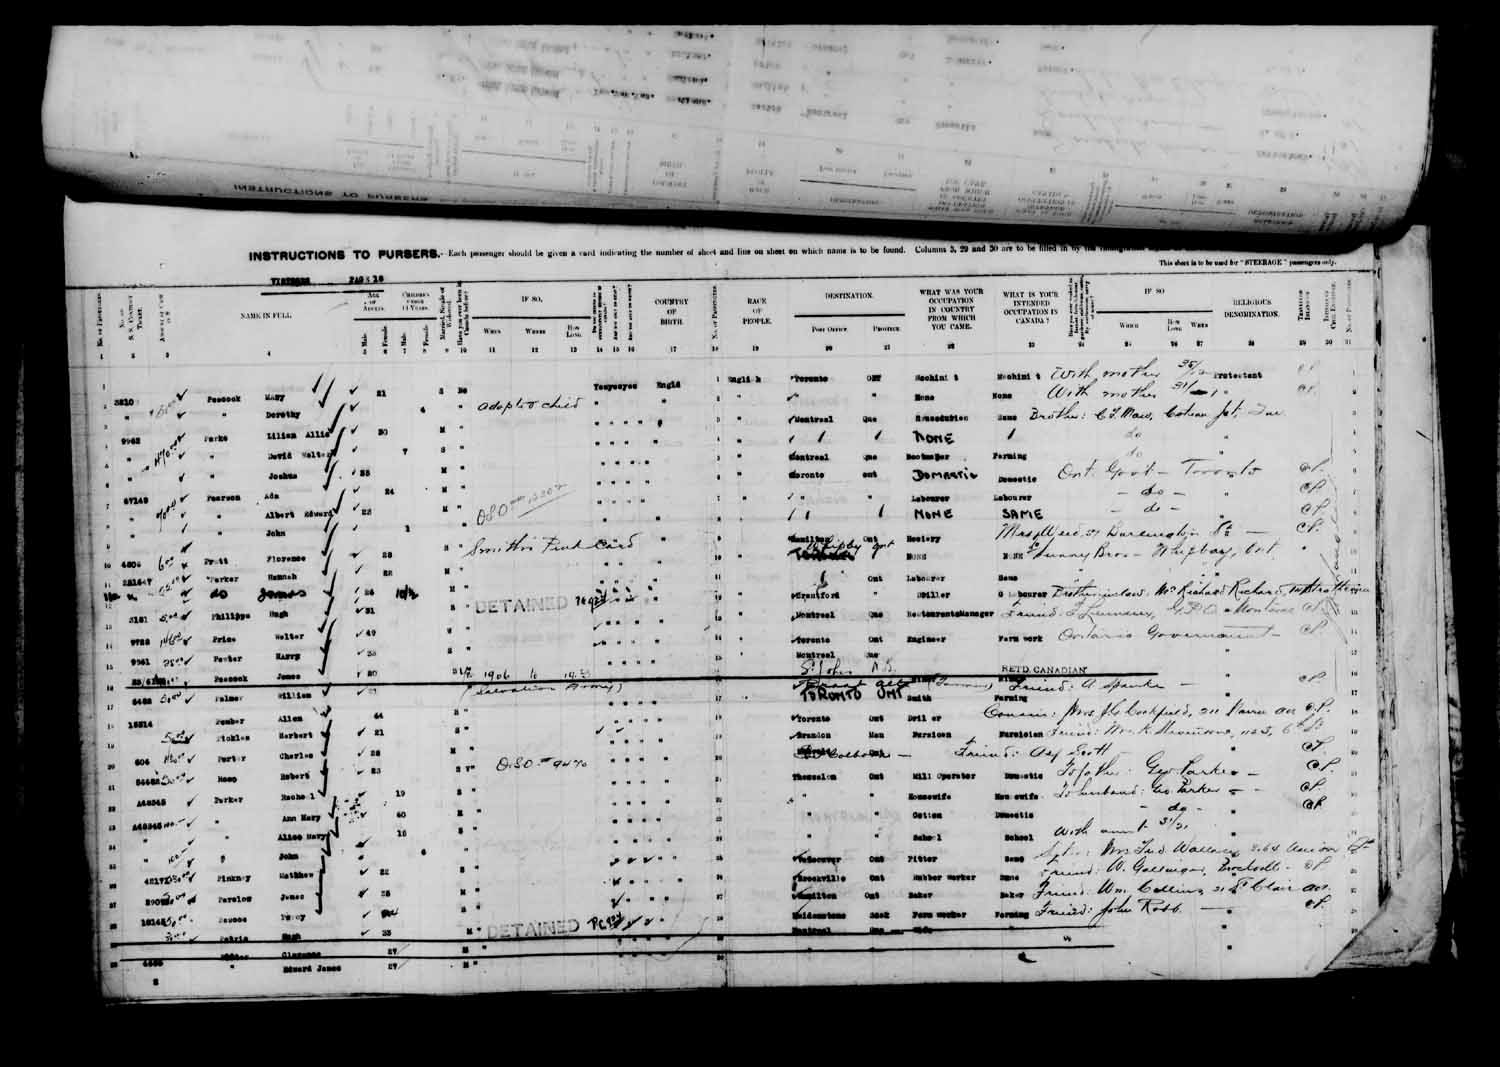 Digitized page of Passenger Lists for Image No.: e003610658